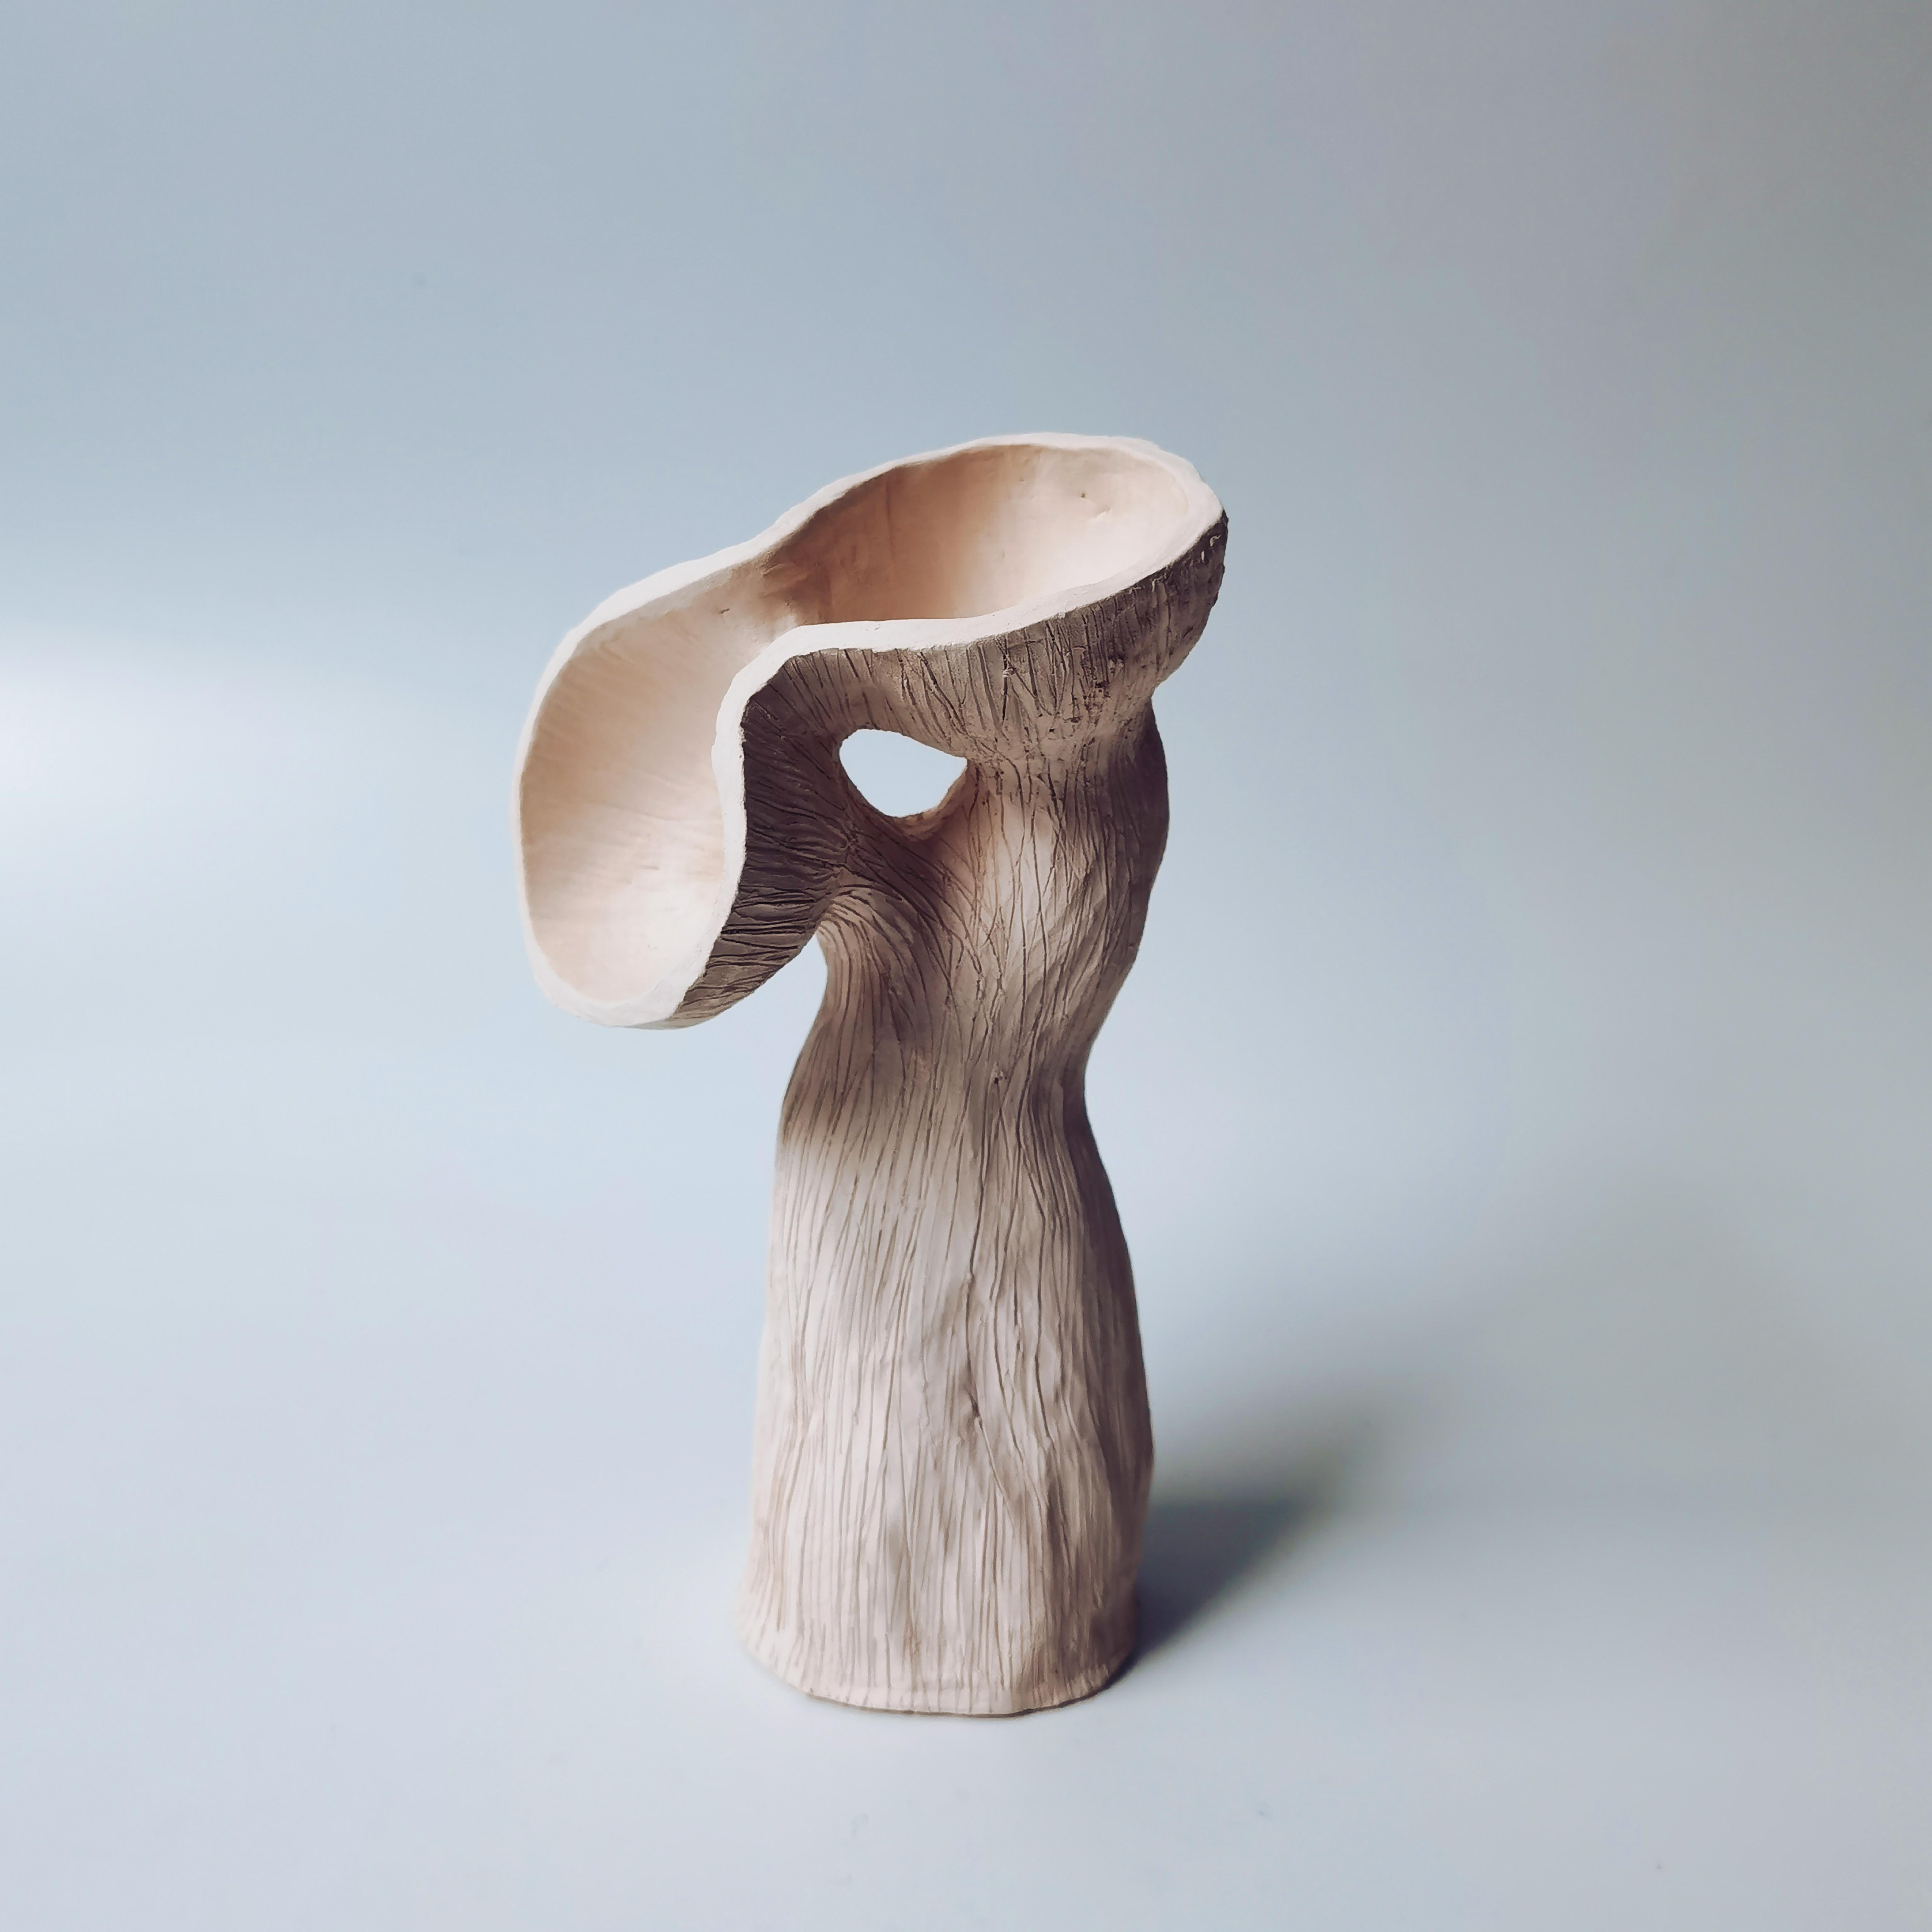 Two pod, One stem small by Jan Ernst
Dimensions: H 25 cm
Materials: White stoneware

Jan Ernst’s work takes on an experimental approach, as he prefers making bespoke pieces by hand. His organic design stems from his
abstract understanding of